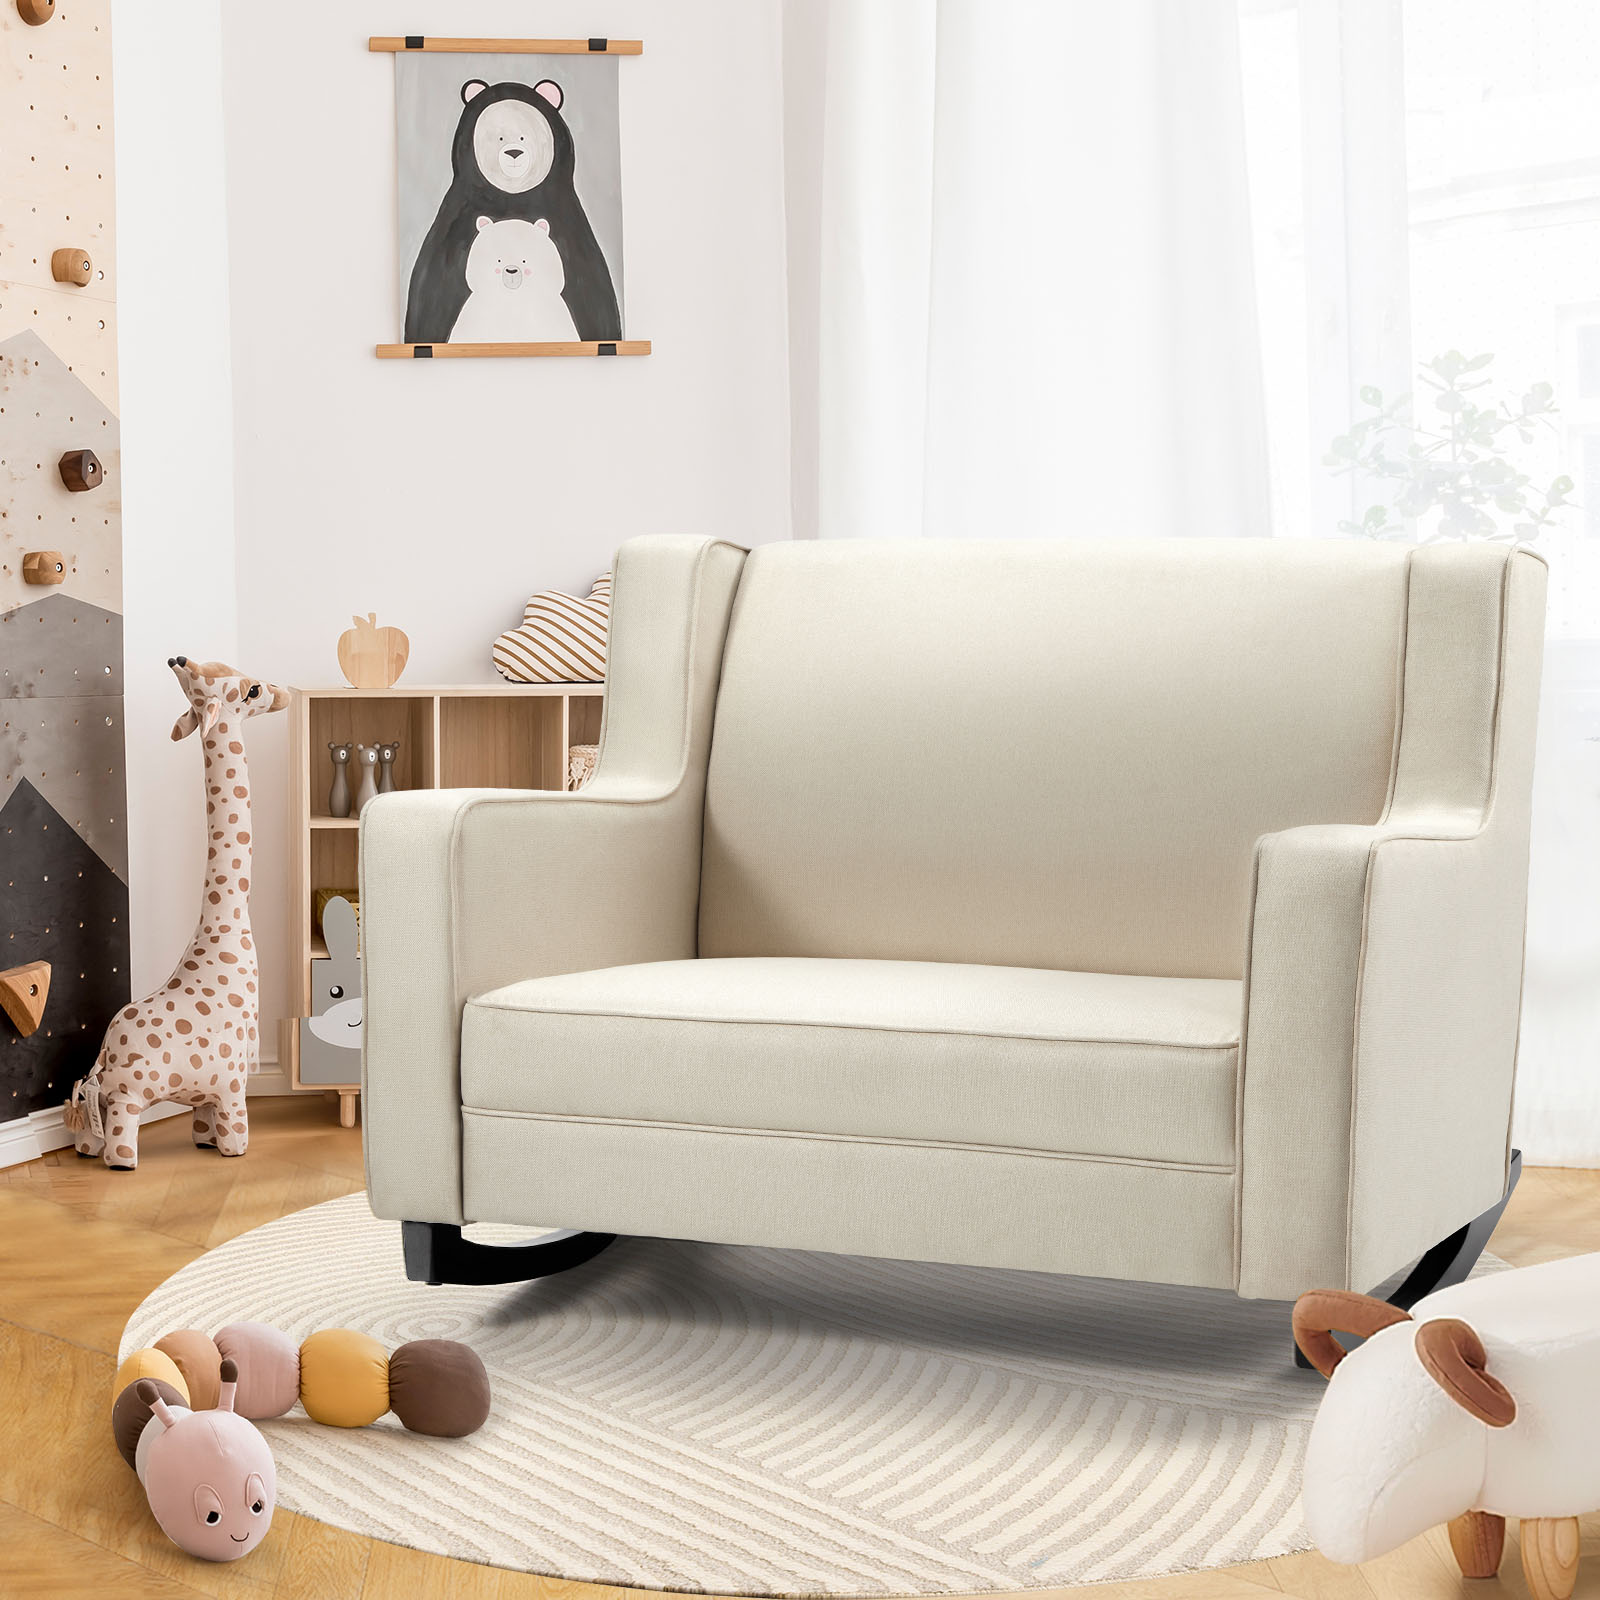 YODOLLA Nursery Rocking Chairs with Spacious Wingback, Double Wide Rocker,Cream - image 1 of 10